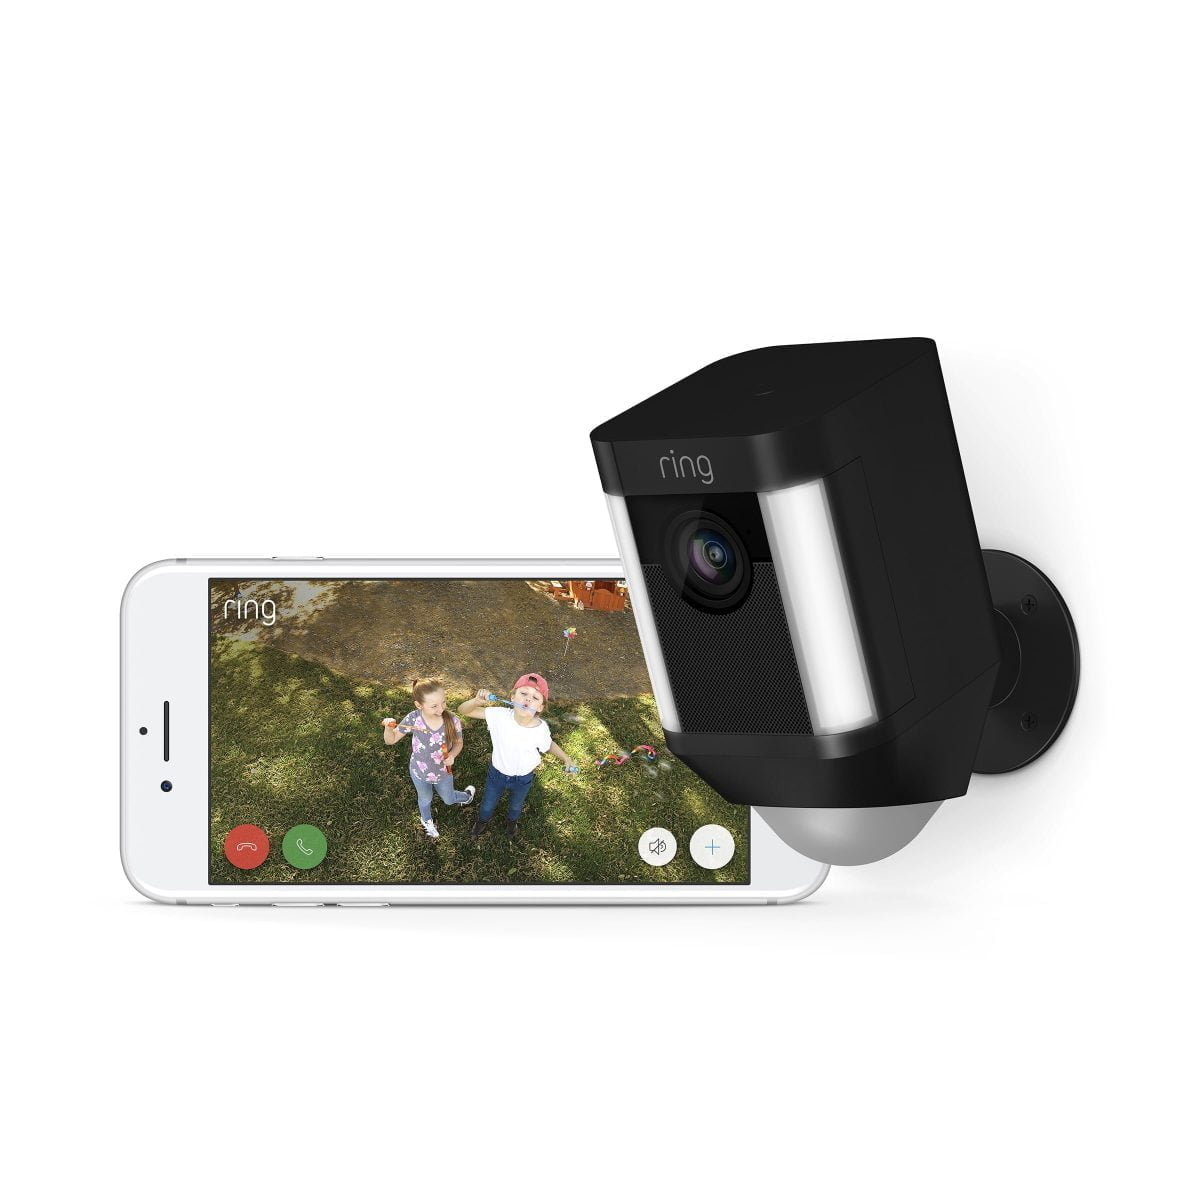 Ring Spotlight Cam Battery Black Product Lifestyle Ring &Lt;H1&Gt;Ring Spotlight Cam Battery - Black&Lt;/H1&Gt; Https://Www.youtube.com/Watch?V=Yrbc1Pwuasg &Lt;Ul&Gt; &Lt;Li&Gt;See, Hear And Speak To People On Your Property From Your Phone, Tablet And Pc&Lt;/Li&Gt; &Lt;Li&Gt;Shine The Lights And Start Recording Video As Soon As Motion Is Detected&Lt;/Li&Gt; &Lt;Li&Gt;Sound The 110-Decibel Siren On Suspicious Activity. Connectivity-802.11 B G N Wi-Fi Connection At 2.4Ghz&Lt;/Li&Gt; &Lt;Li&Gt;Includes All The Tools You Need To Get Your Cam Setup In Just A Few Minutes&Lt;/Li&Gt; &Lt;Li&Gt;Battery-Powered Hd Camera With Two-Way Talk And Spotlights, For Security Anywhere You Need It&Lt;/Li&Gt; &Lt;/Ul&Gt; &Lt;Pre&Gt;&Lt;Strong&Gt;&Lt;Span Class=&Quot;A-List-Item&Quot;&Gt;One Year Warranty &Lt;B&Gt;We Also Provide International Wholesale And Retail Shipping To All Gcc Countries: Saudi Arabia, Qatar, Oman, Kuwait, Bahrain.&Lt;/B&Gt;&Lt;/Span&Gt;&Lt;/Strong&Gt;&Lt;/Pre&Gt; Ring Spotlight Cam Battery Ring Spotlight Cam Battery - Black